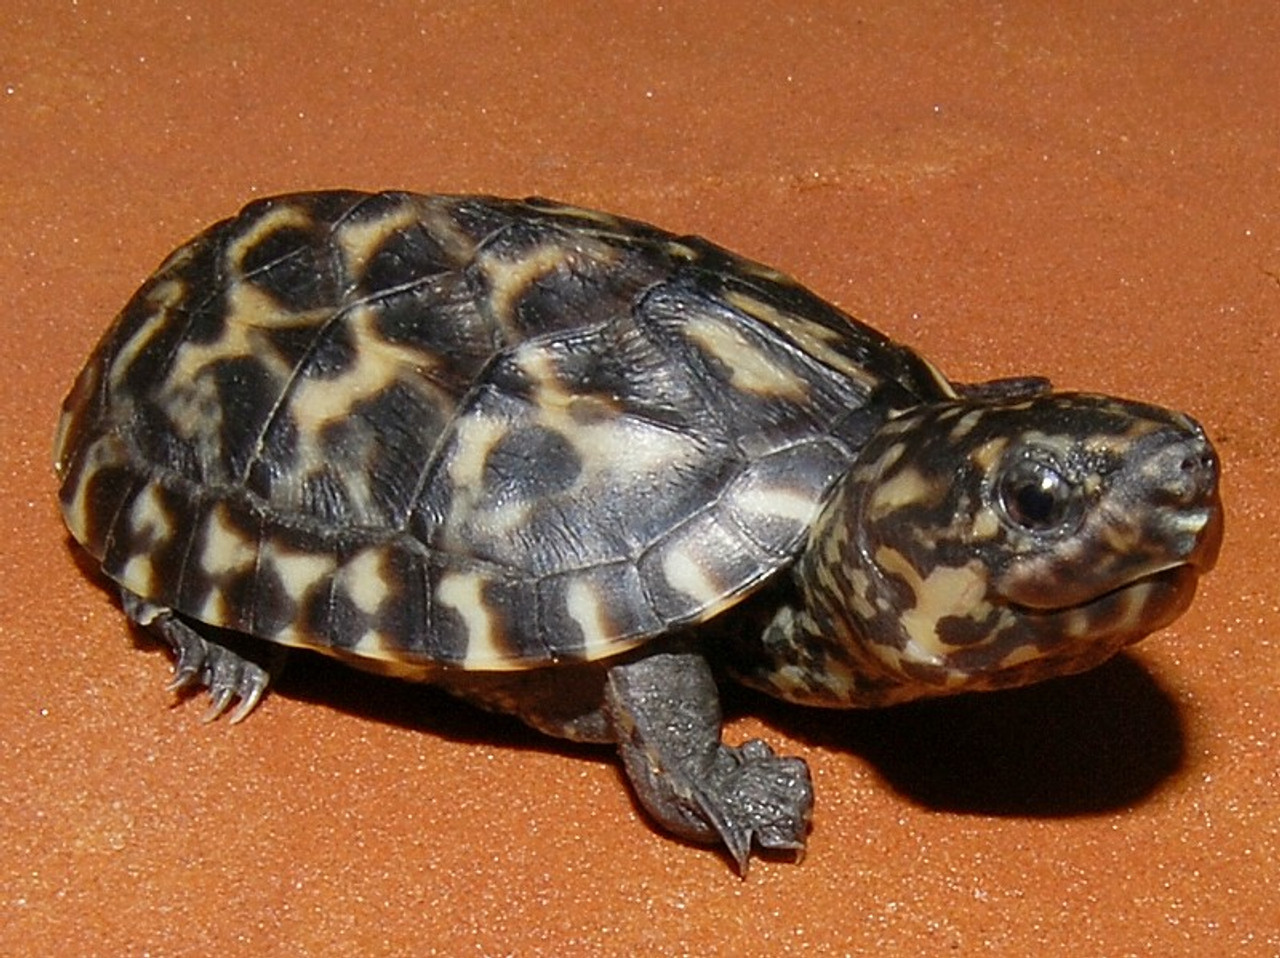 A Manicurist Was Key in a Baby Turtle Breakthrough